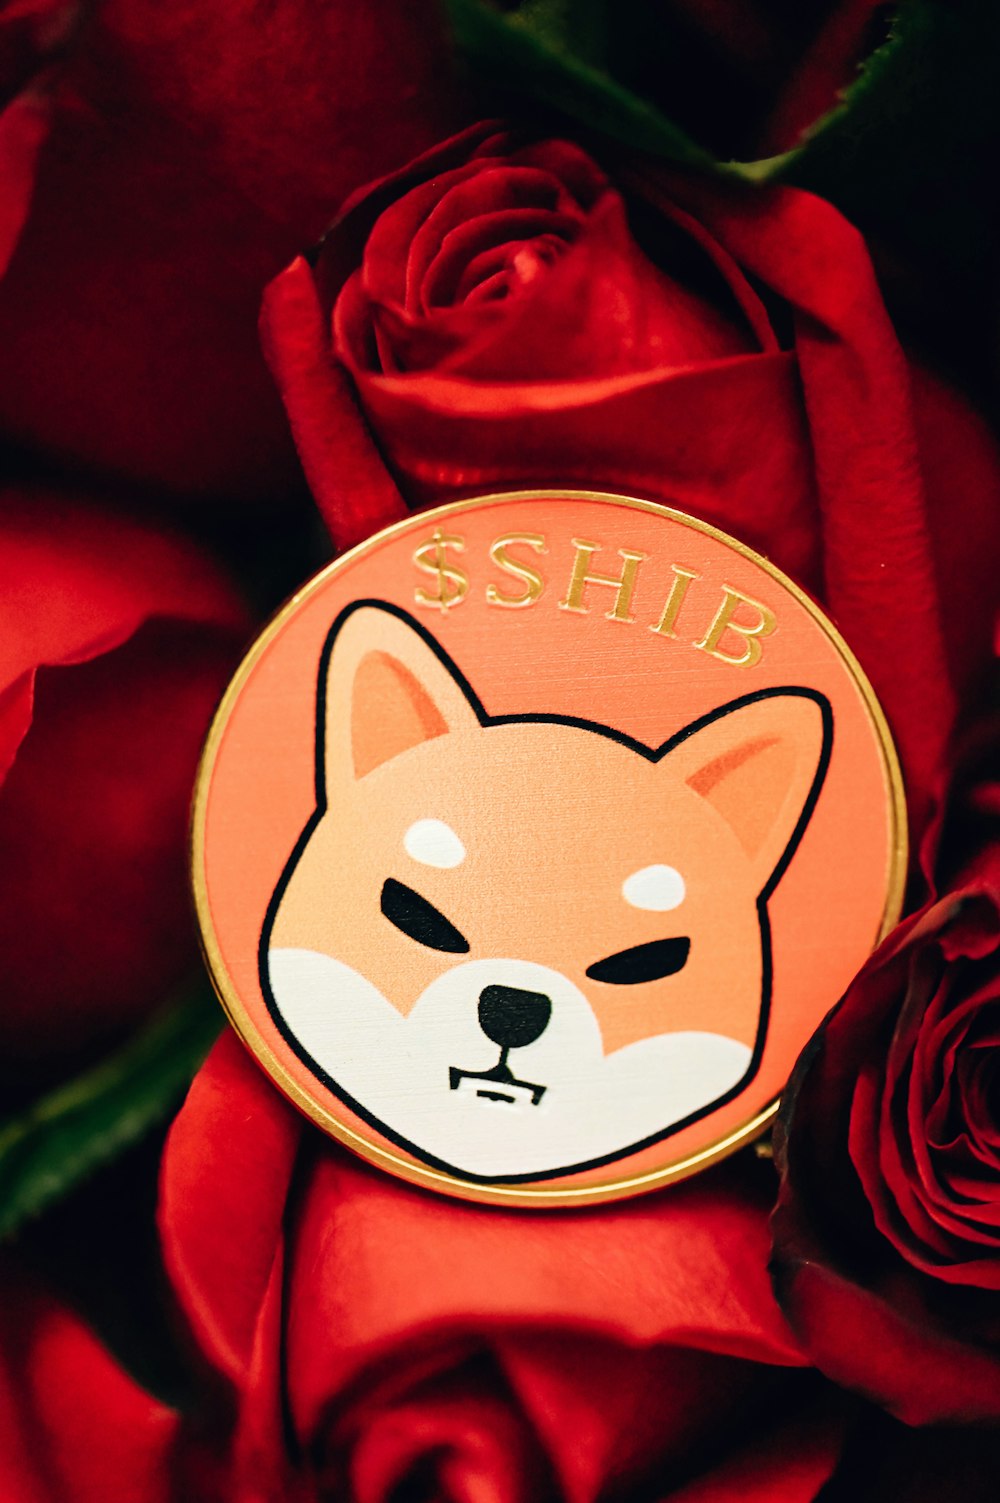 a close up of a red rose with a sticker on it